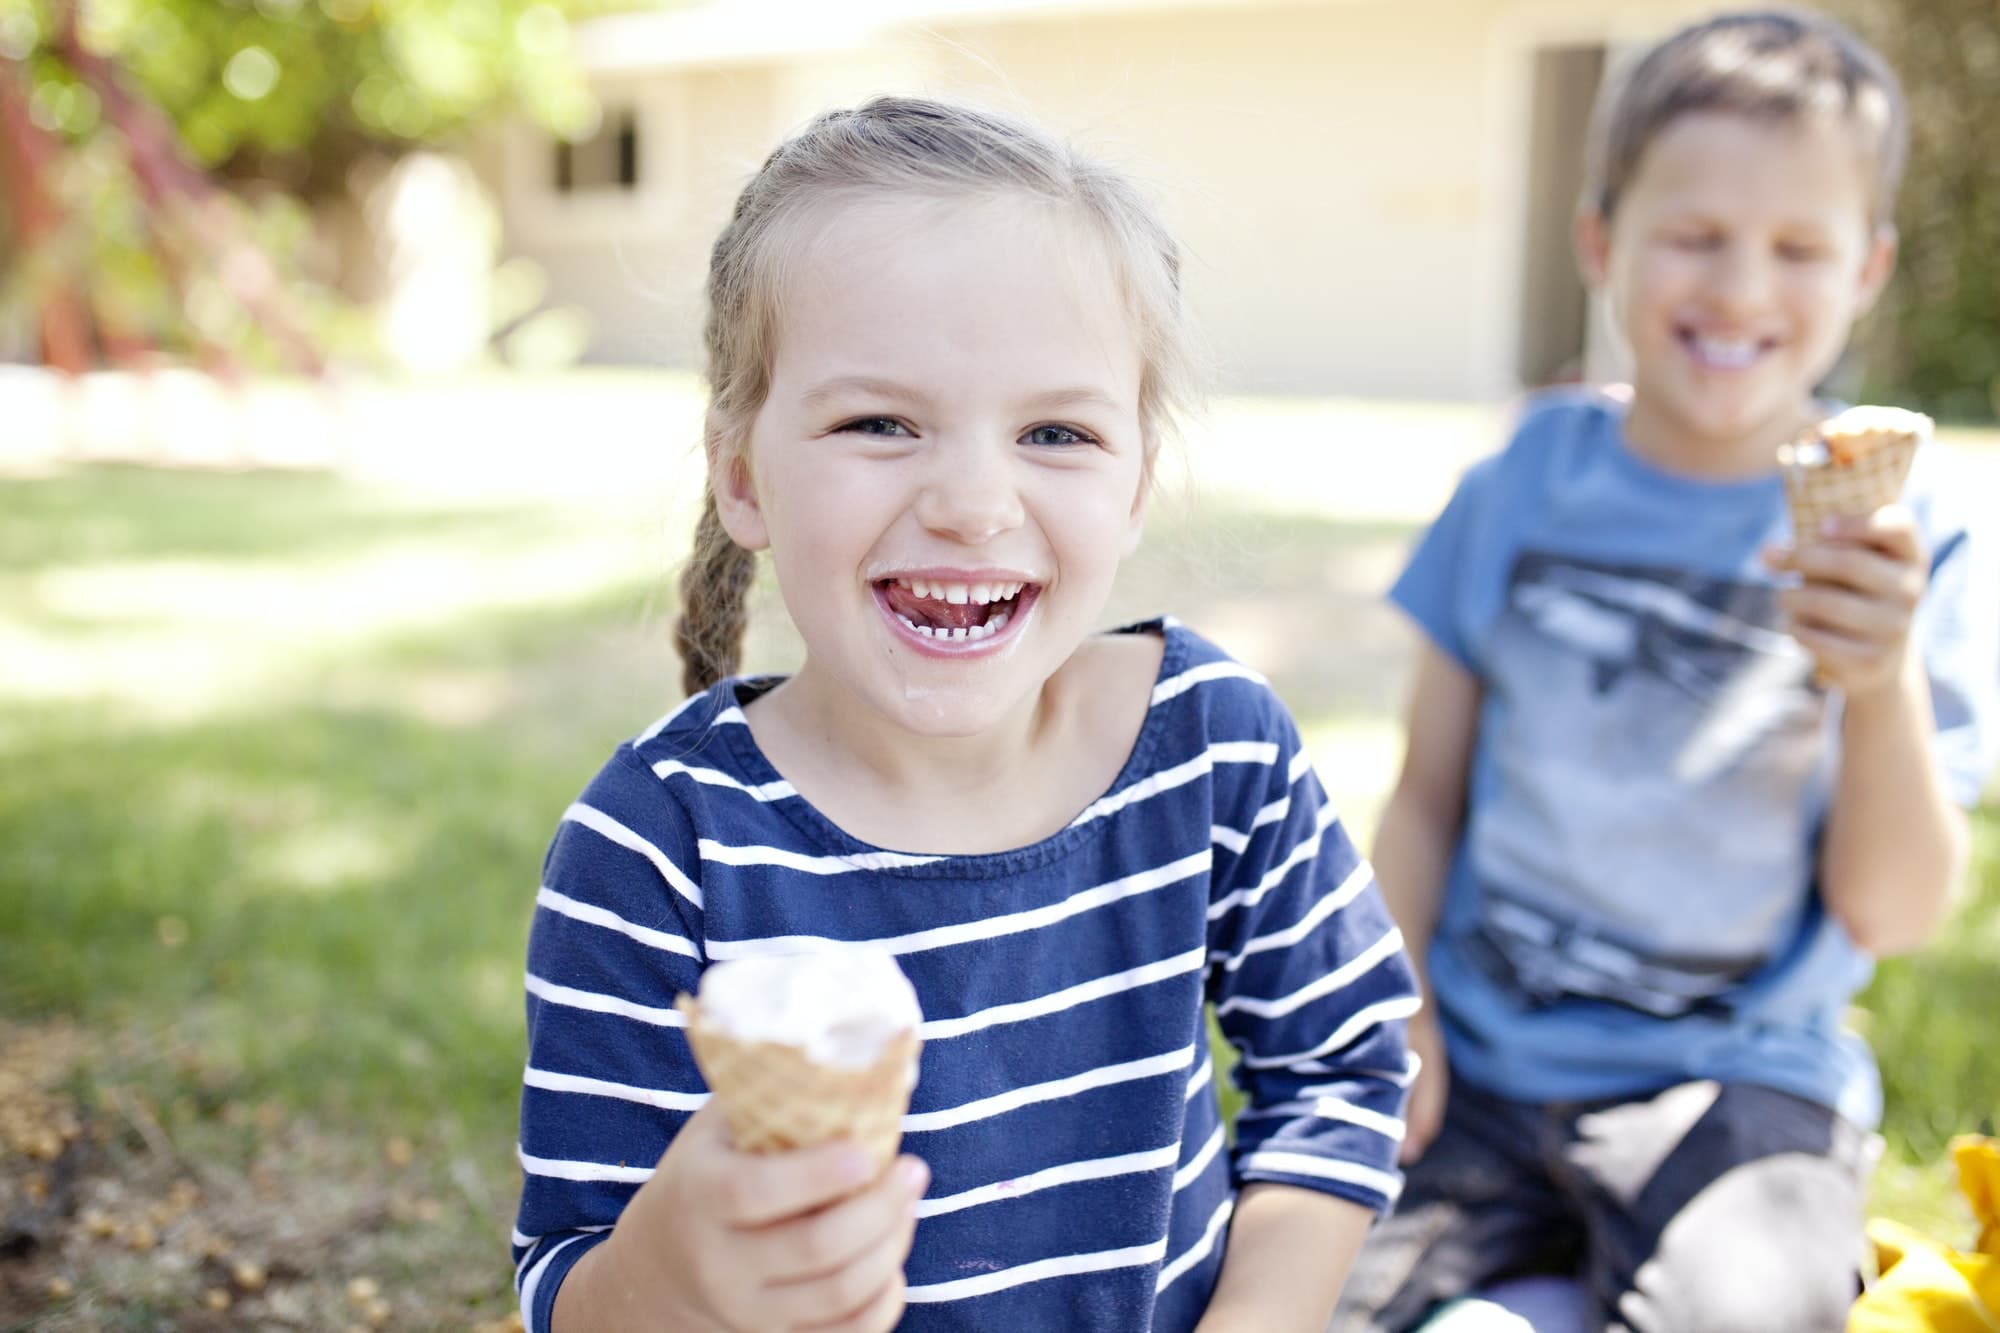 kids eating ice cream cones outside and laughing